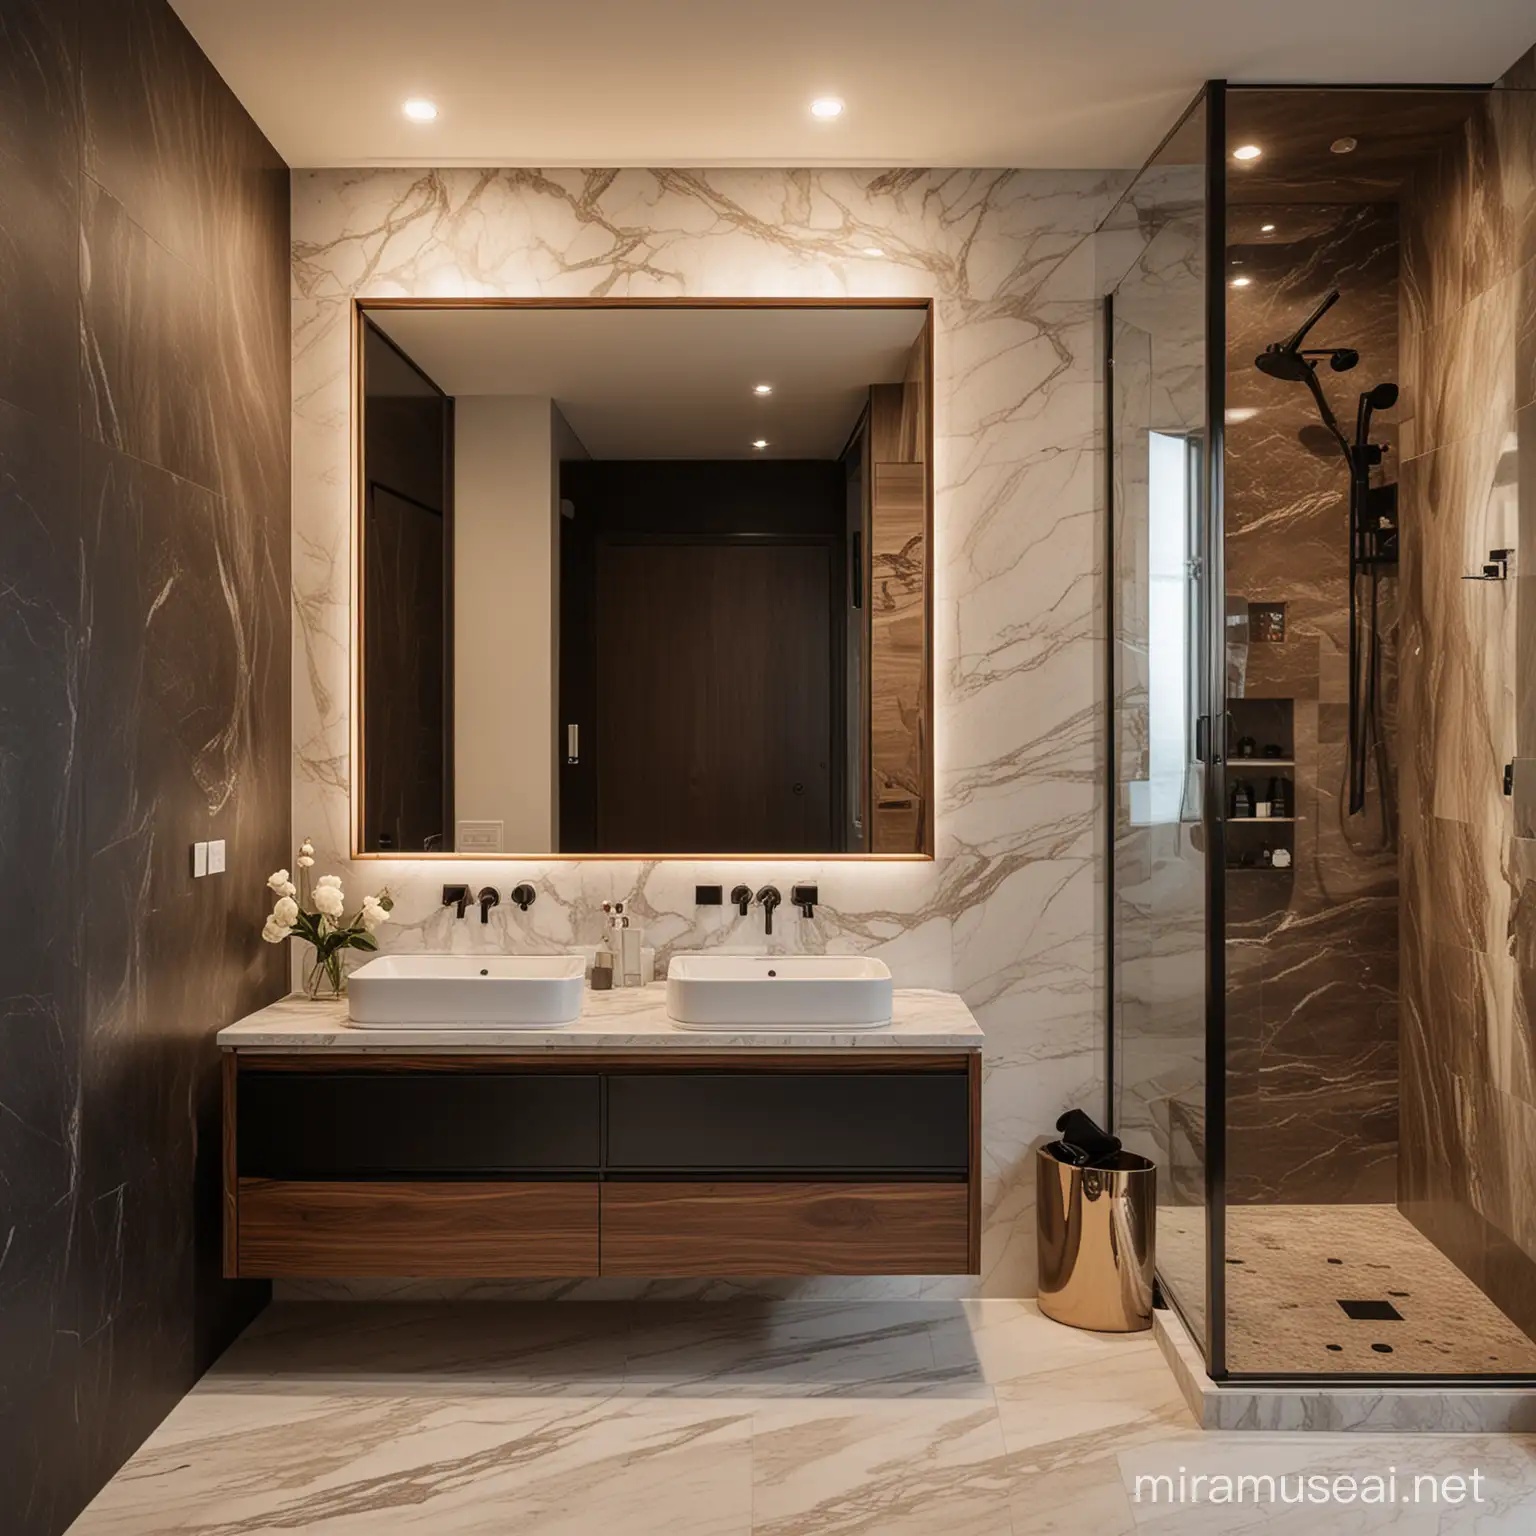 Modern Bathroom with Walnut and Marble Accents in Warm Light